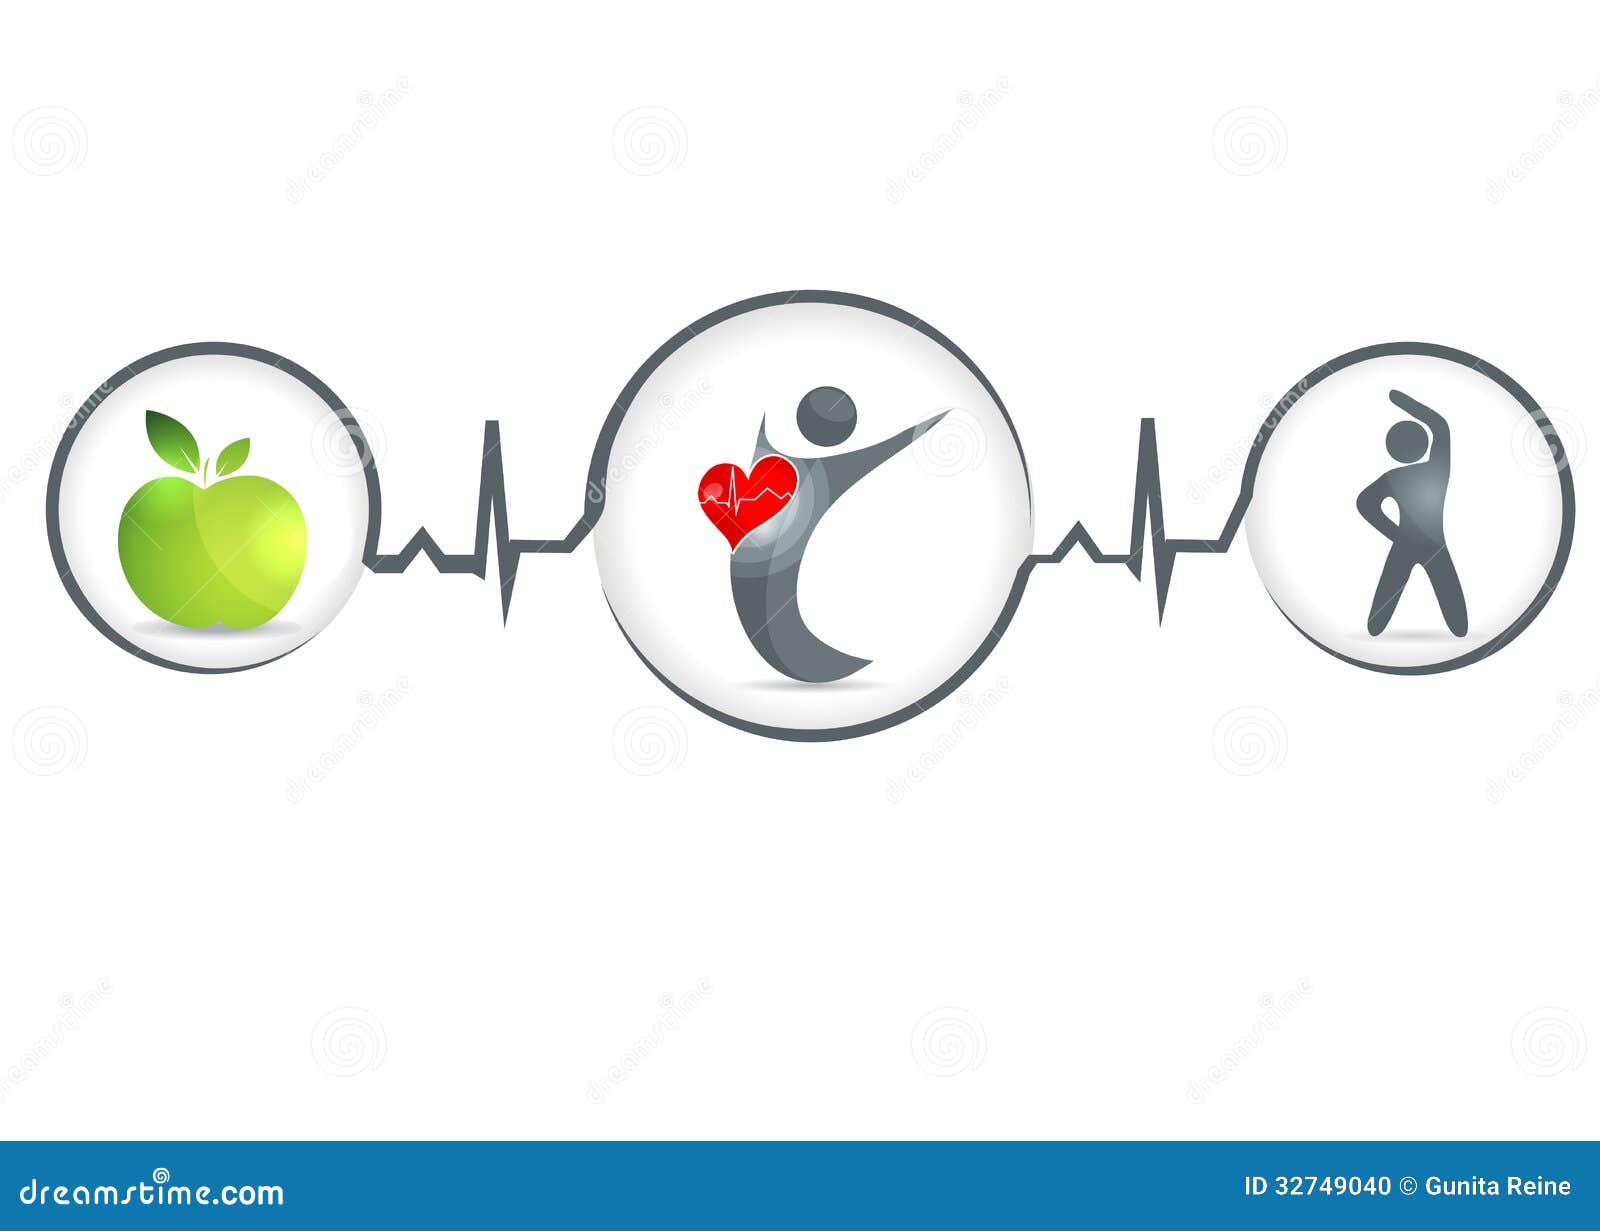 health and fitness clipart - photo #33